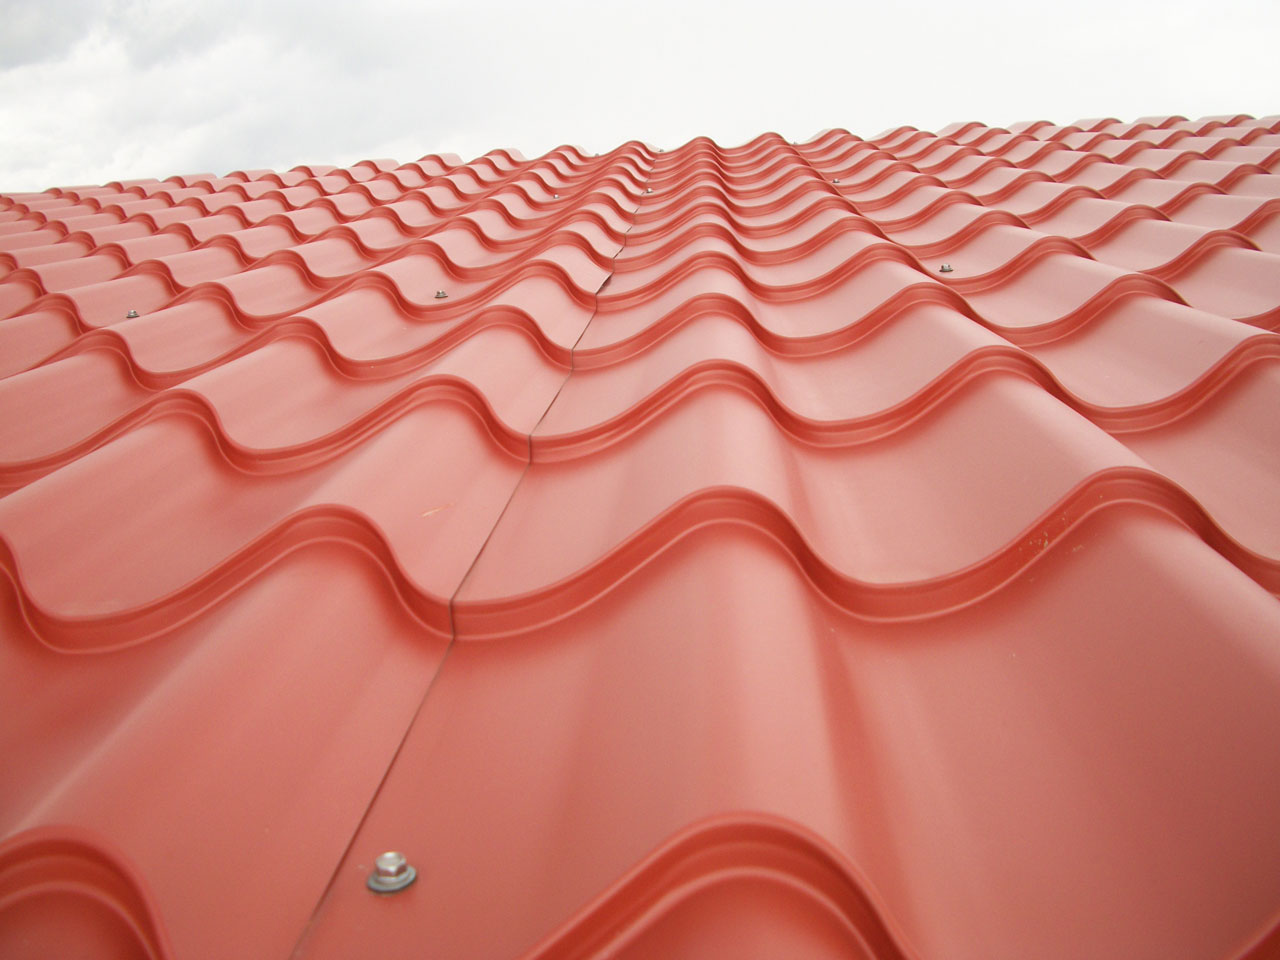 Image result for metal roofing